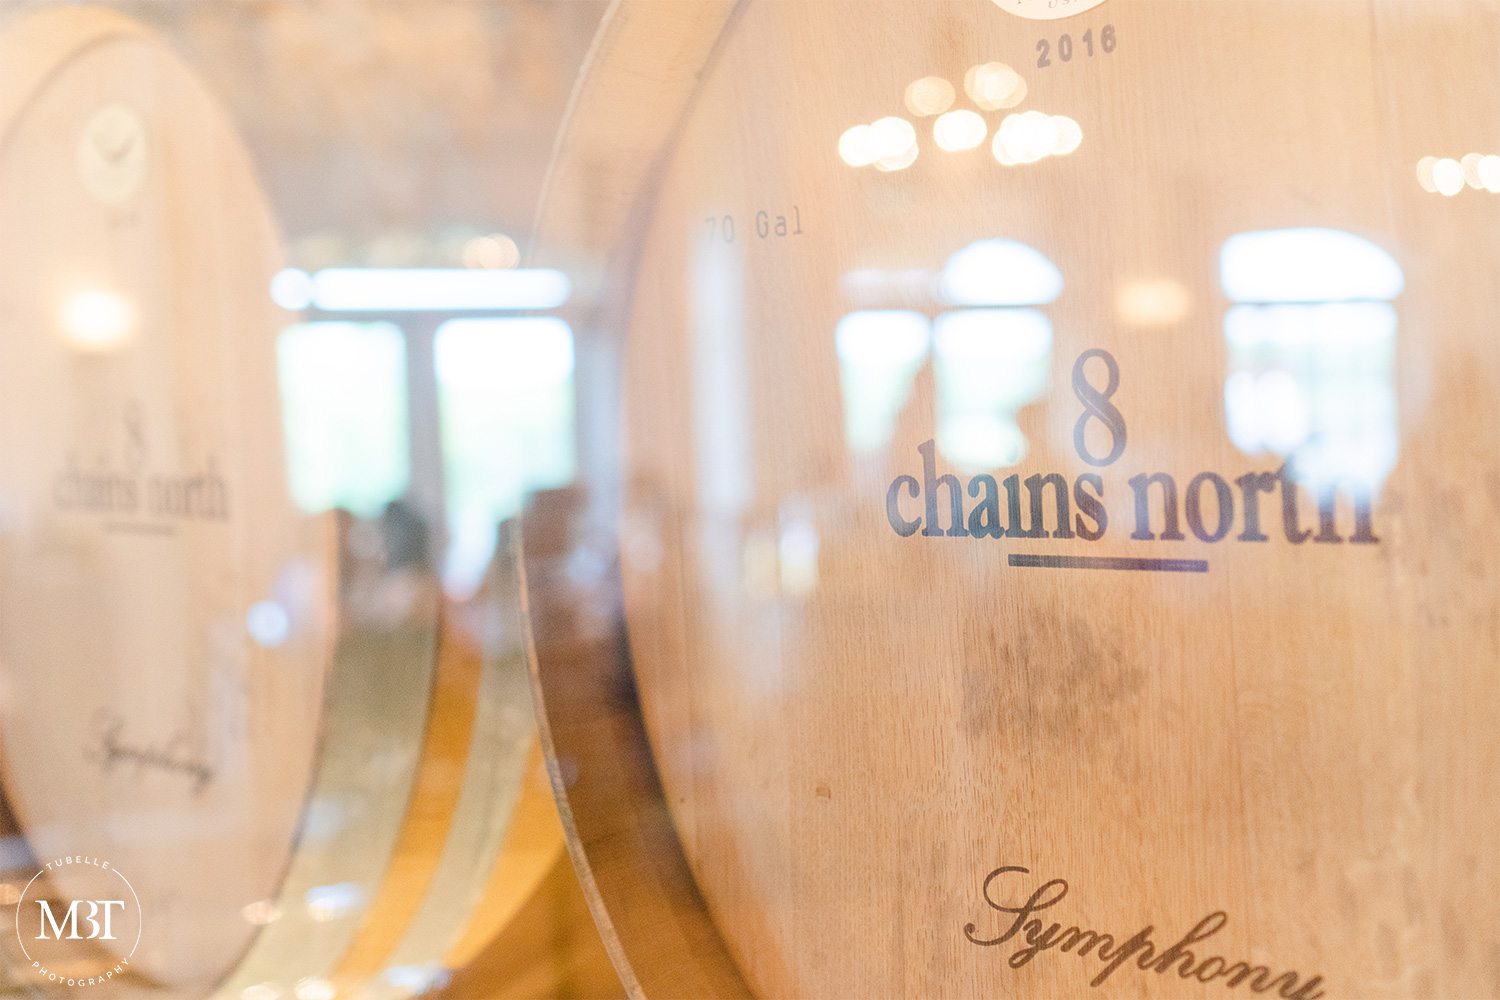 8 chains north barrel, taken in Waterford, Virginia at a bridal shower covered by a DC event photographer